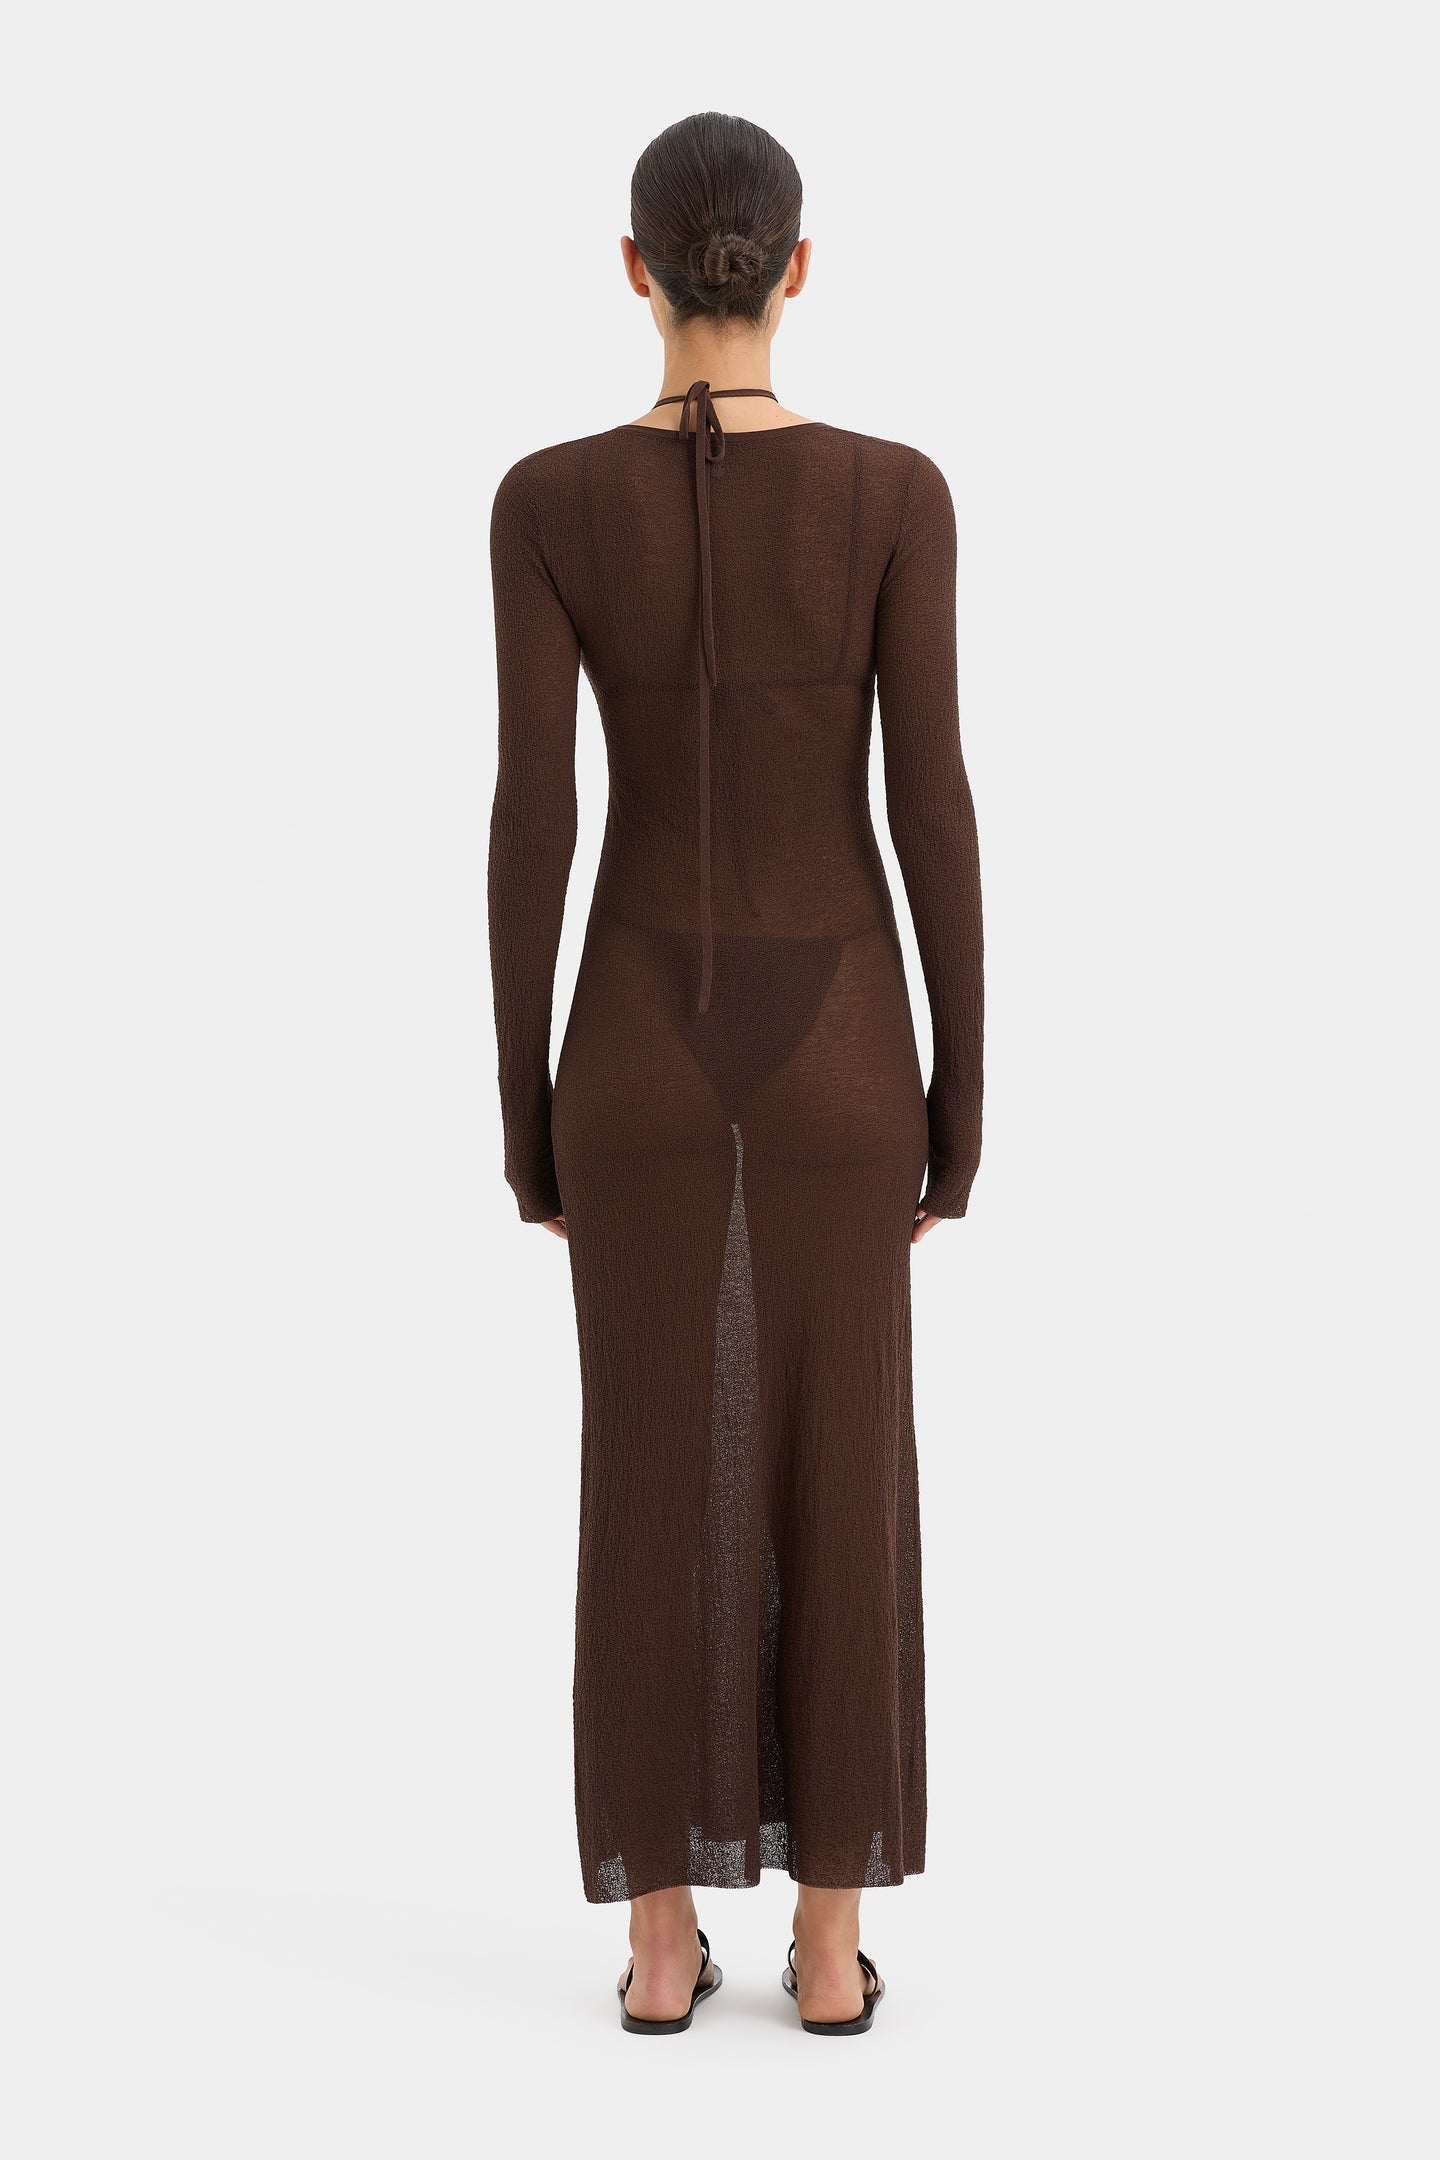 SIR Emmeline Halter Long Sleeve Dress in Chocolate available at The New Trend Australia.